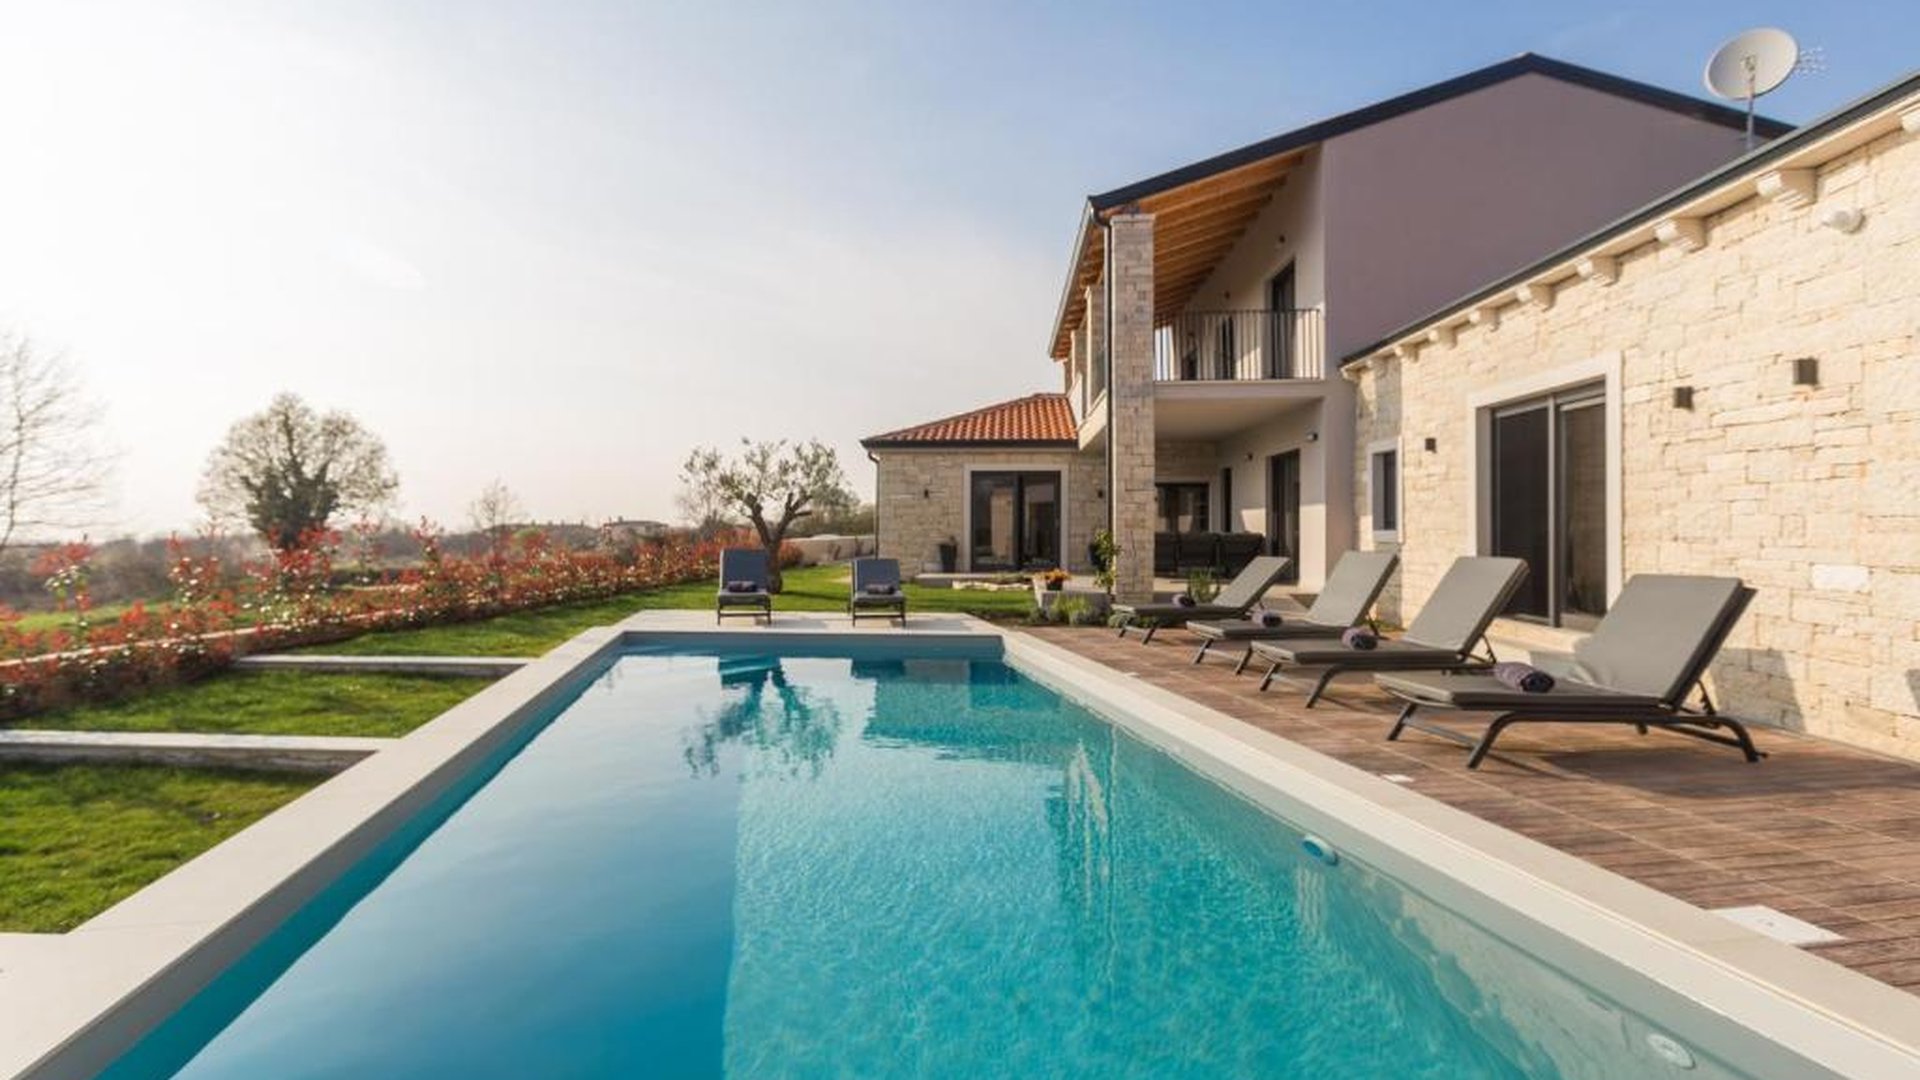 The advantage of buying real estate in Istria